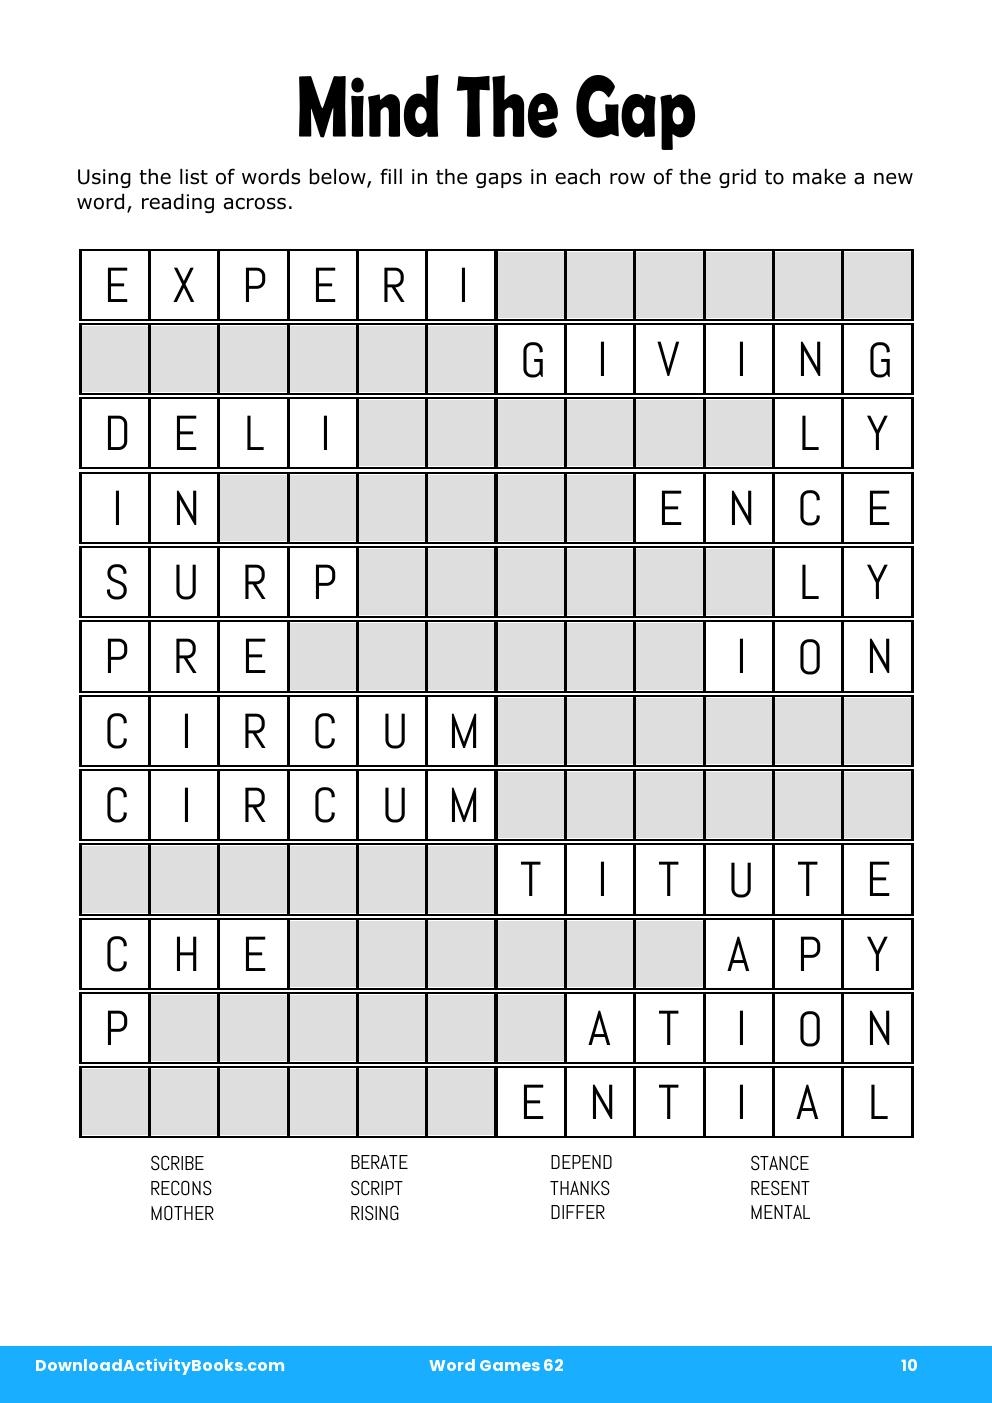 Mind The Gap in Word Games 62